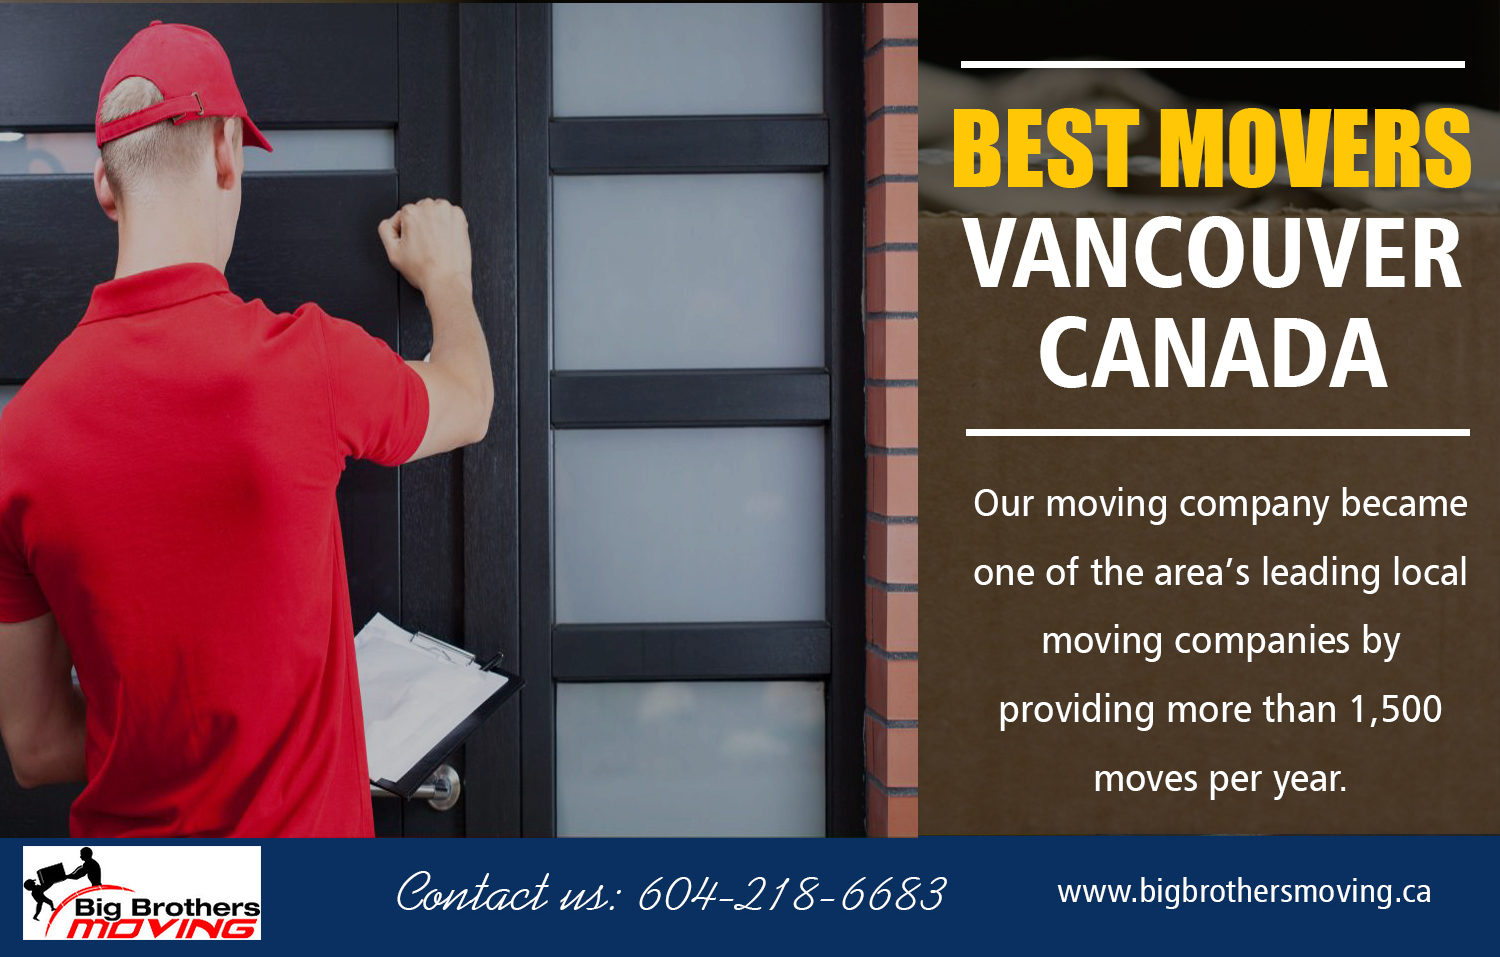 Best Movers Vancouver Canada